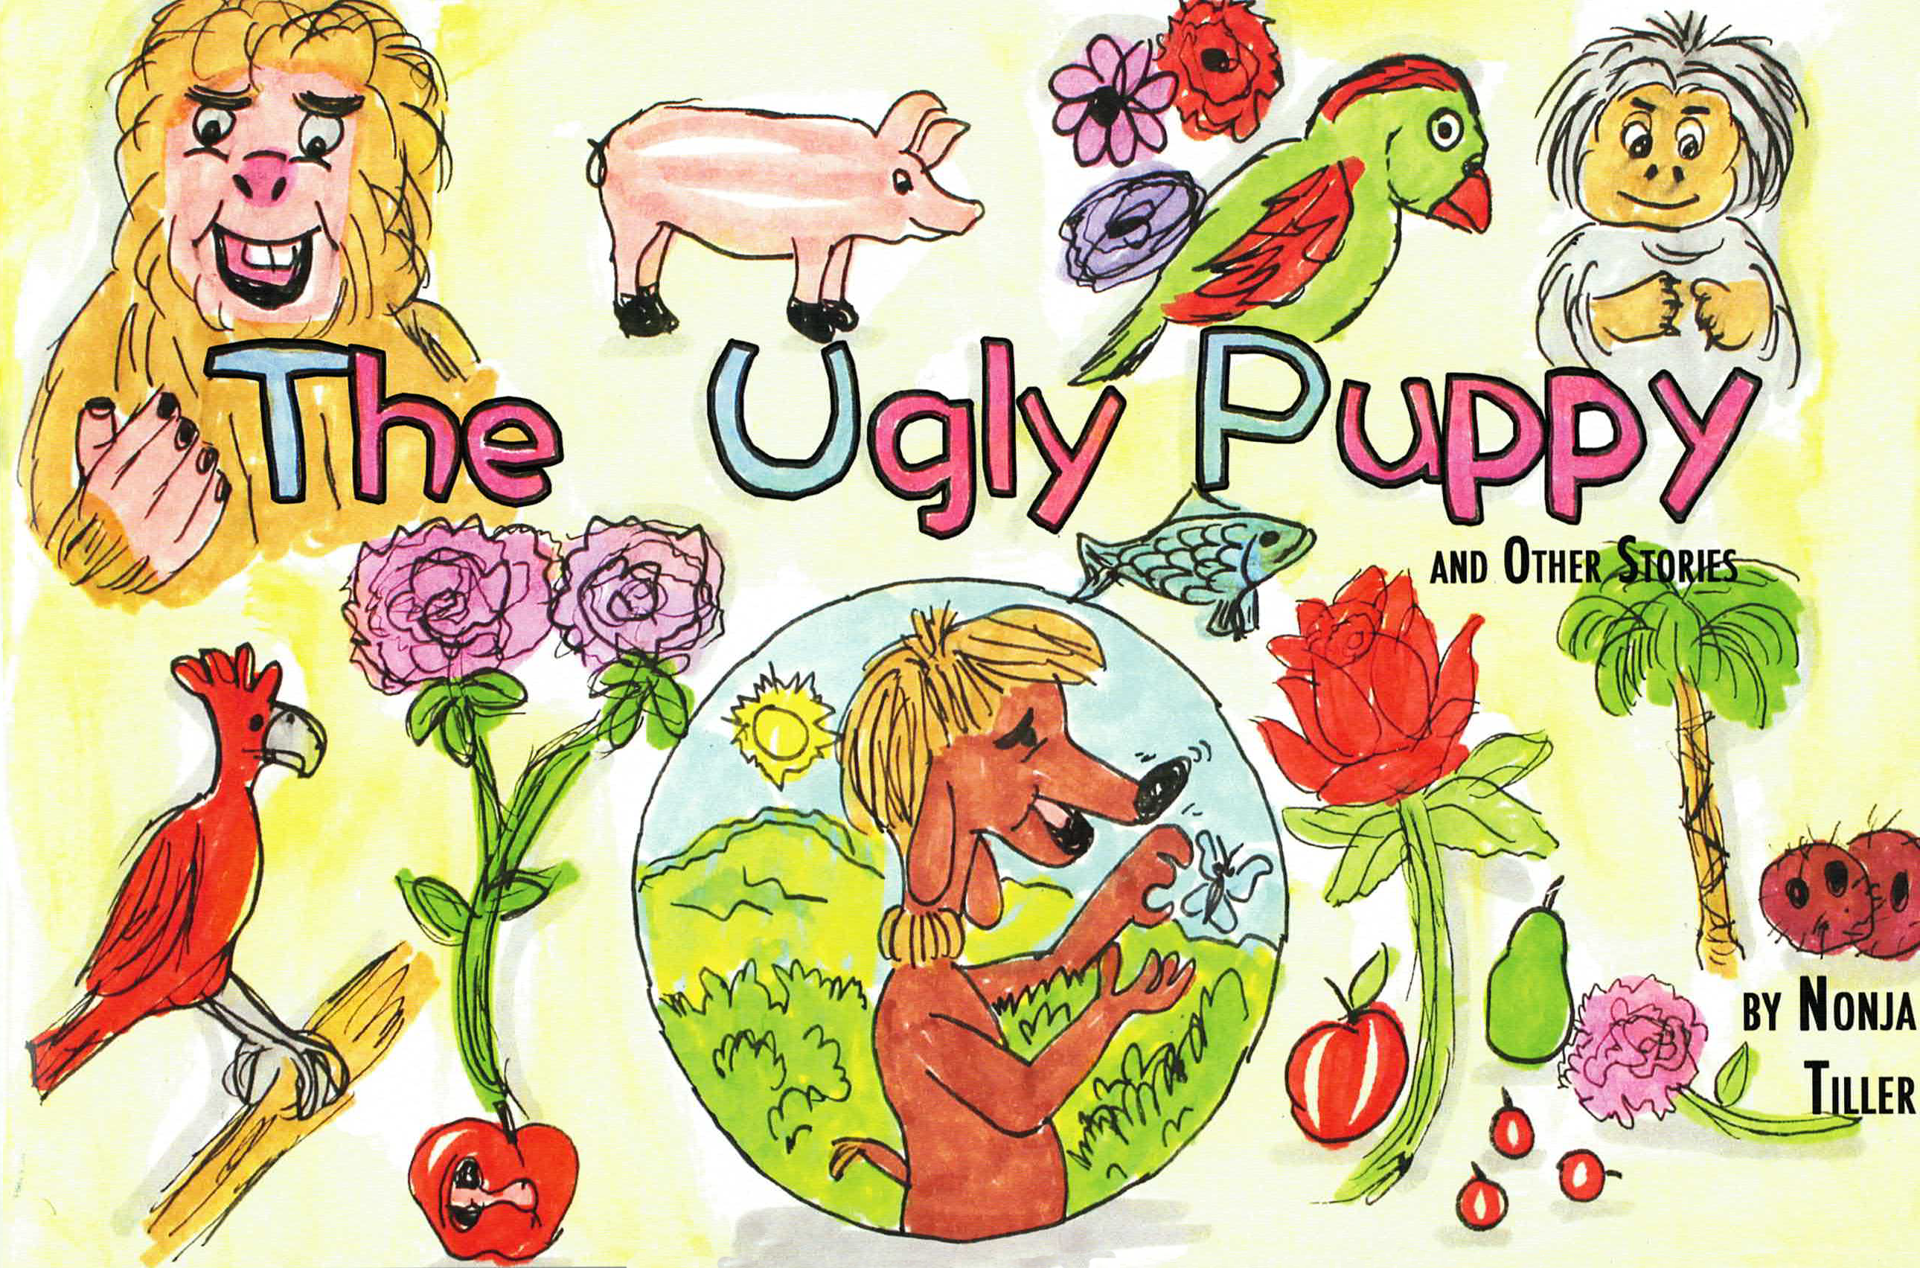 The Ugly Puppy and Other Stories: A Book by Nonja Tiller by Nonja Tiller